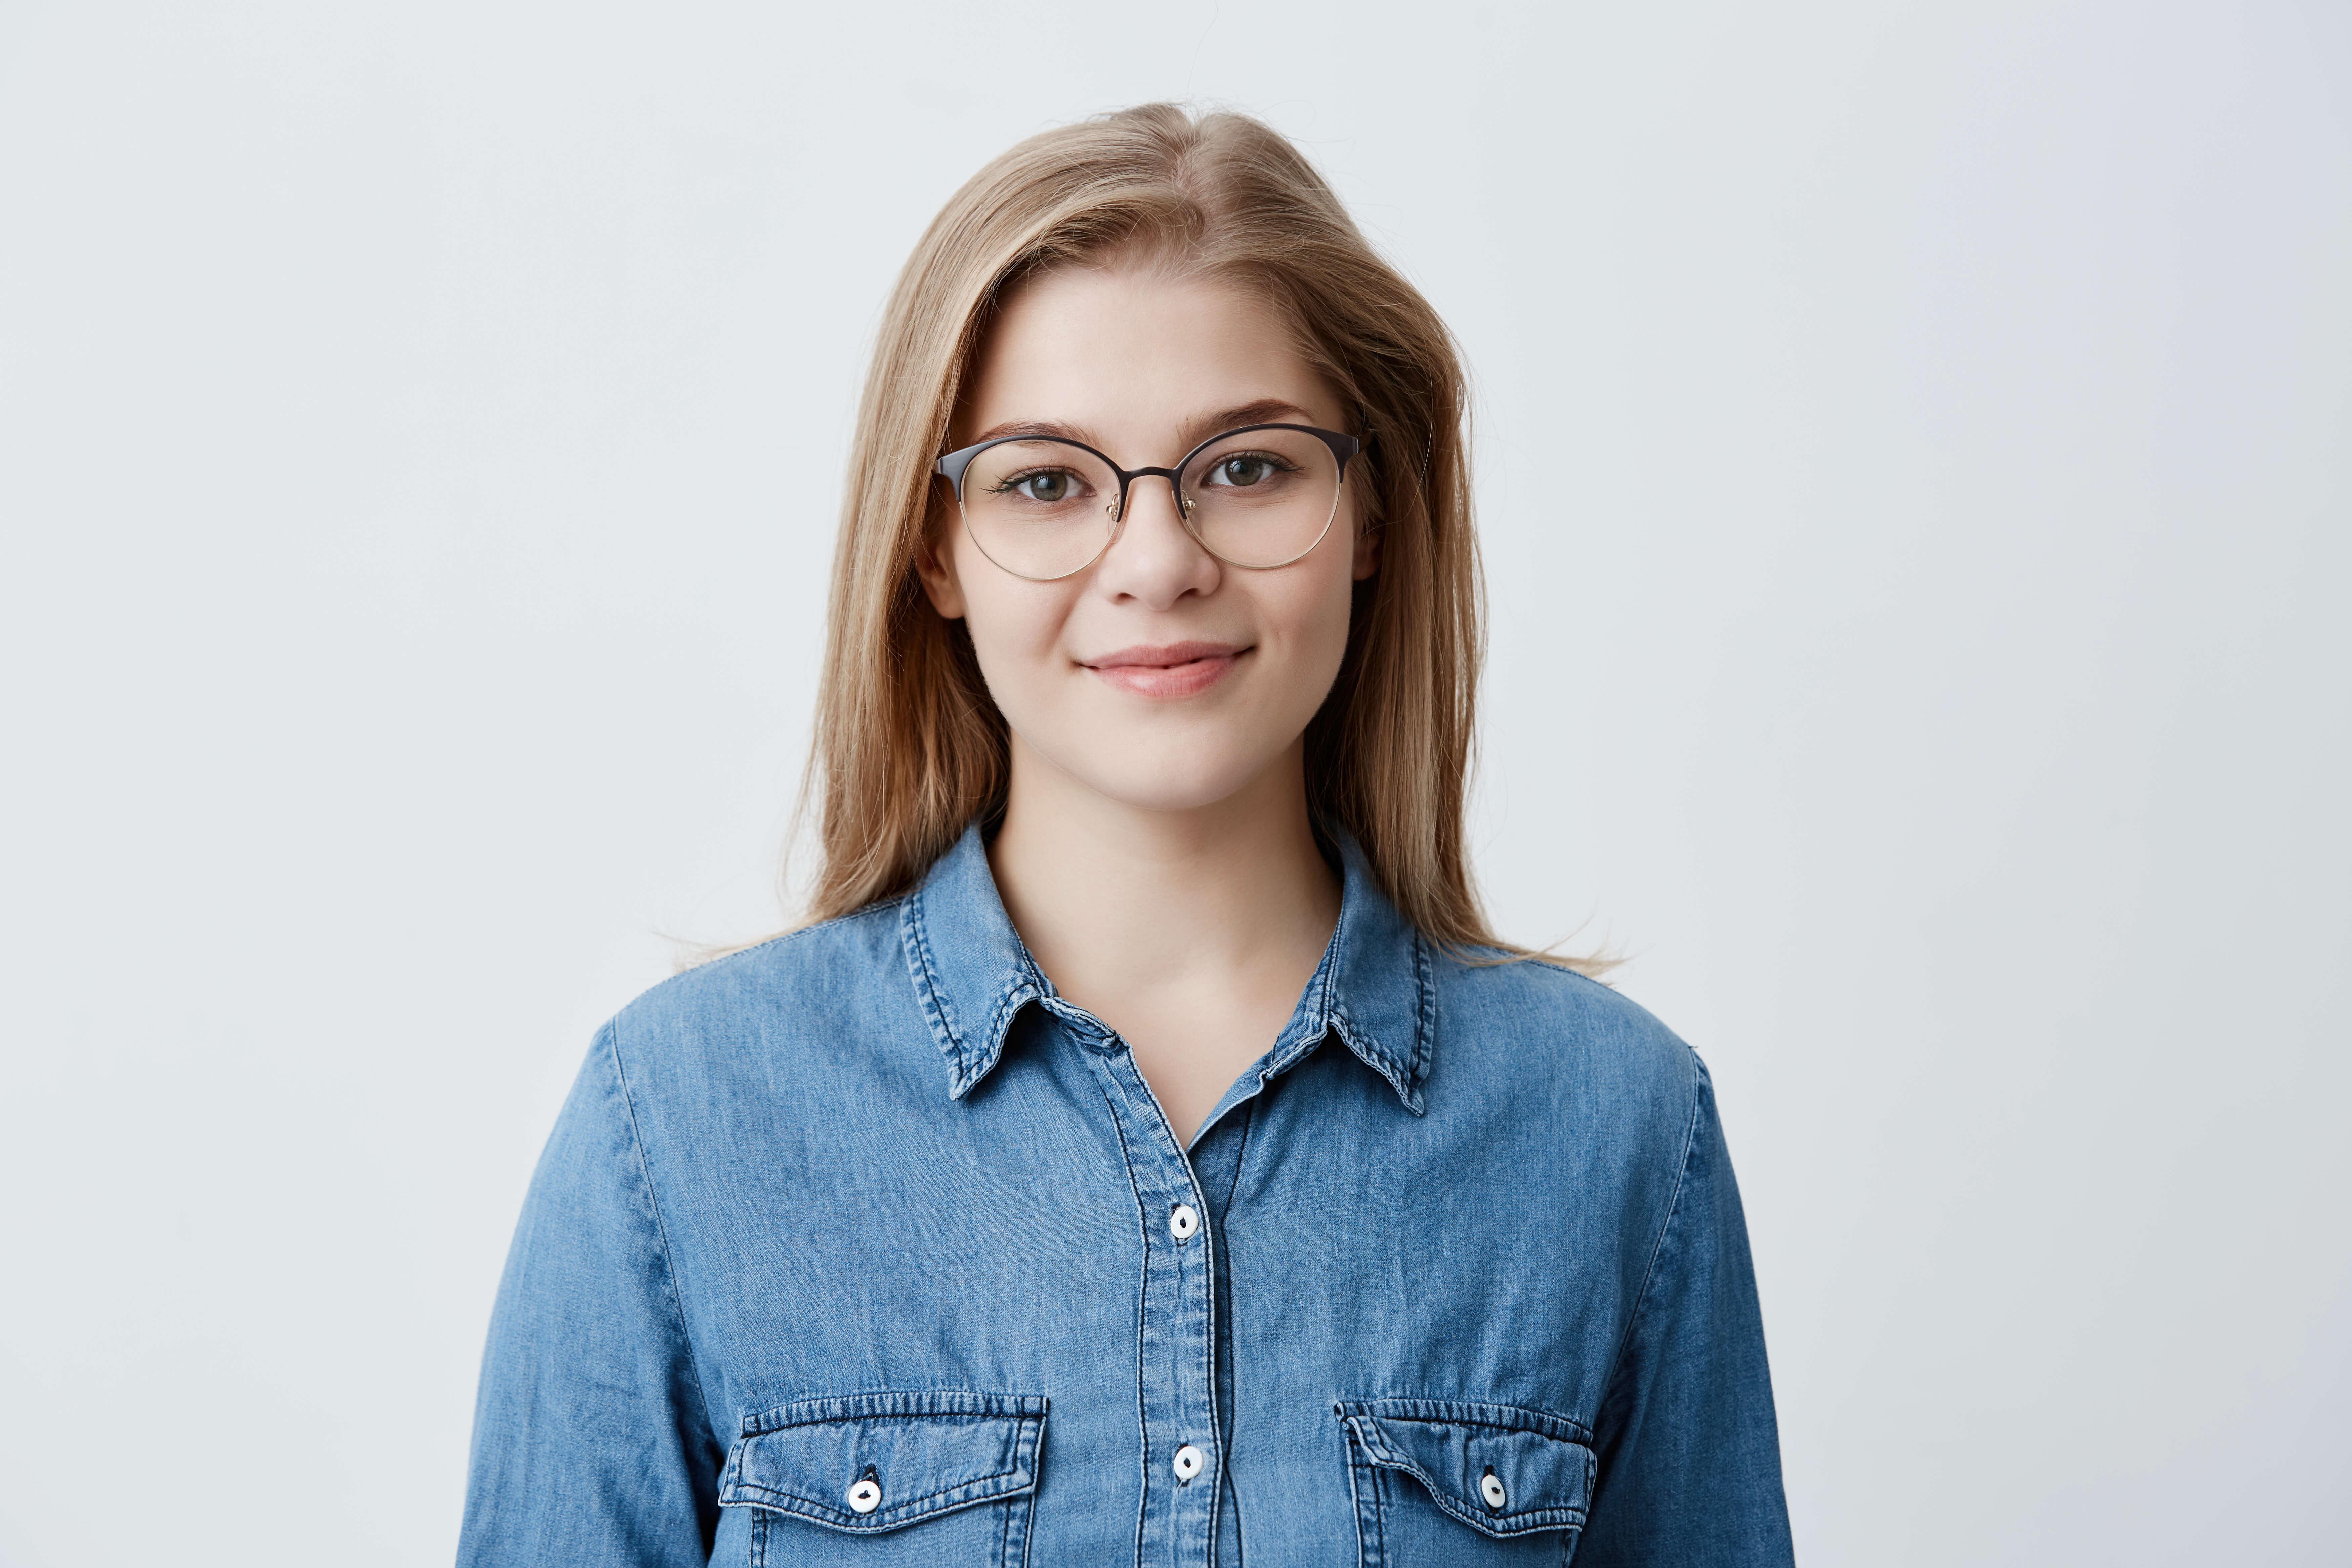 horizontal-portrait-smiling-happy-young-pleasant-looking-female-wears-denim-shirt-stylish-glasses-with-straight-blonde-hair-expresses-positiveness-poses.jpg